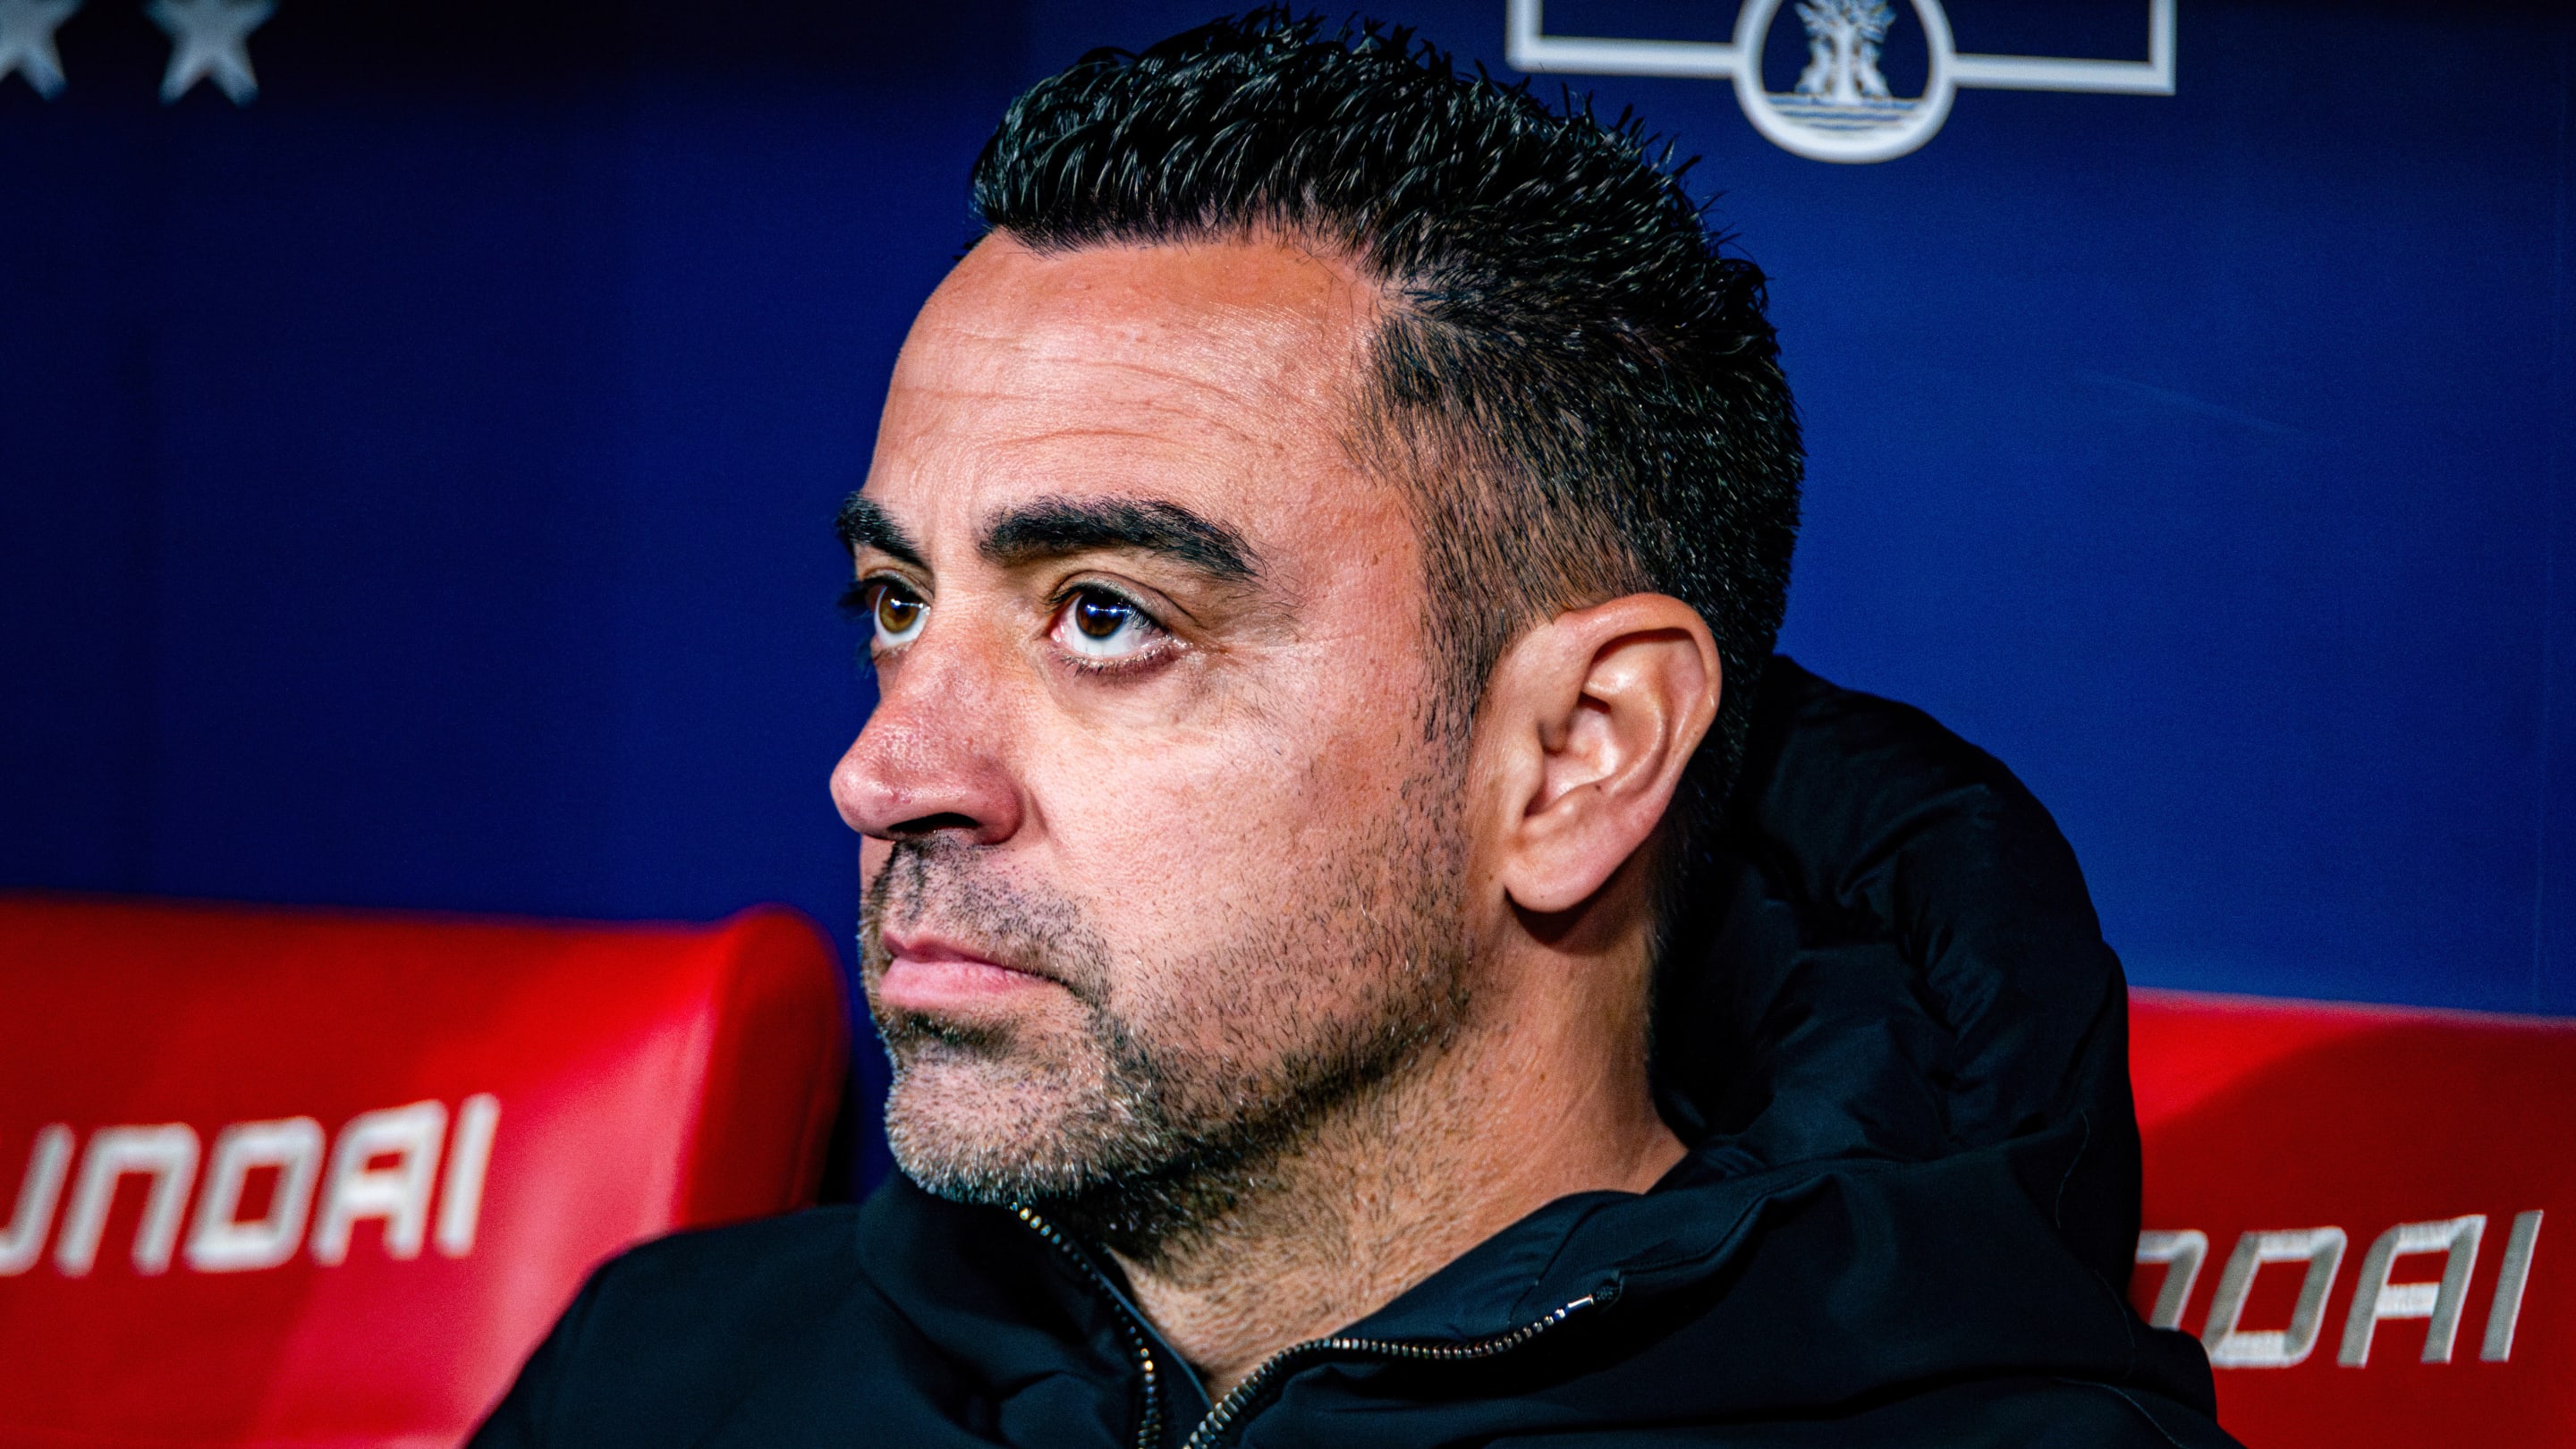 Barcelona confirm Xavi's decision to remain manager